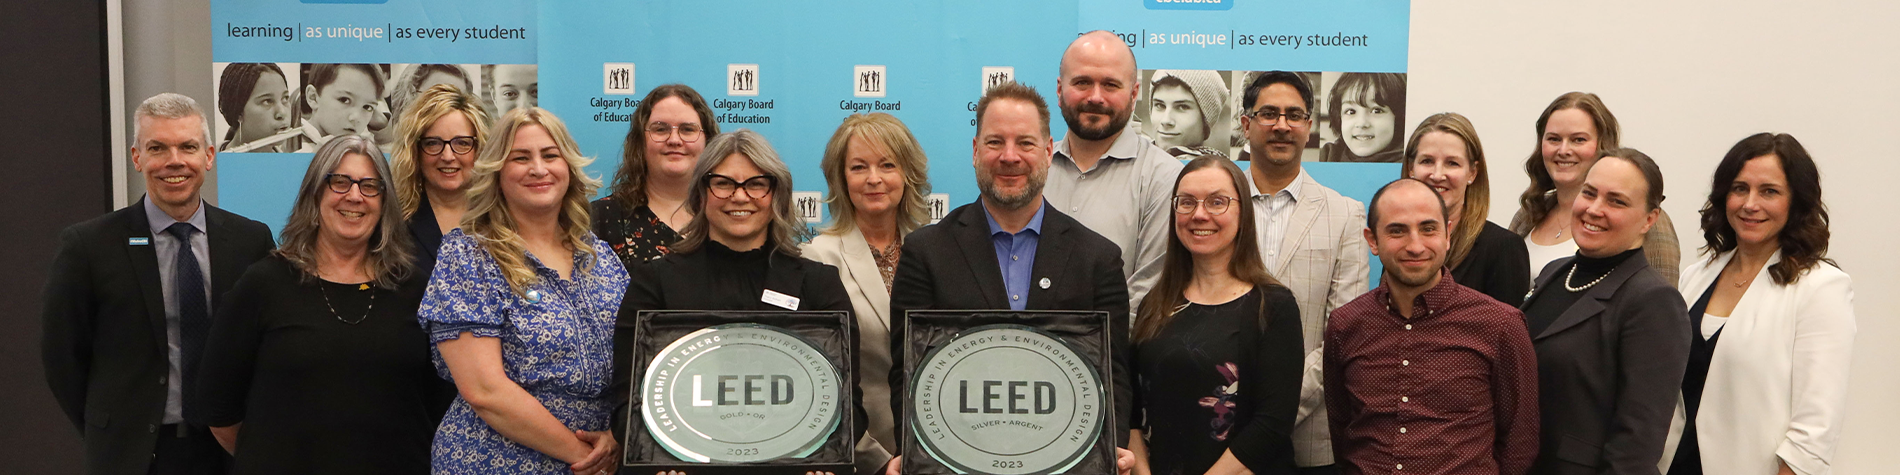 <p class="slider-title">The CBE is Celebrating LEED Designation for Mahogany and Lakeshore Schools</p><div class="banner-line"></div><p class="slider-subtitle">The Calgary Board of Education is celebrating two new schools that have achieved a LEED designation by the Canada Green Building Council (CAGBA).</p> <a style="pointer-events:all" class=AEBannerMoreLink href="https://www.cbe.ab.ca/news-centre/Pages/the-calgary-board-of-education-is-celebrating-leed-designation-for-mahogany-and-lakeshore-schools.aspx">Read More</a>